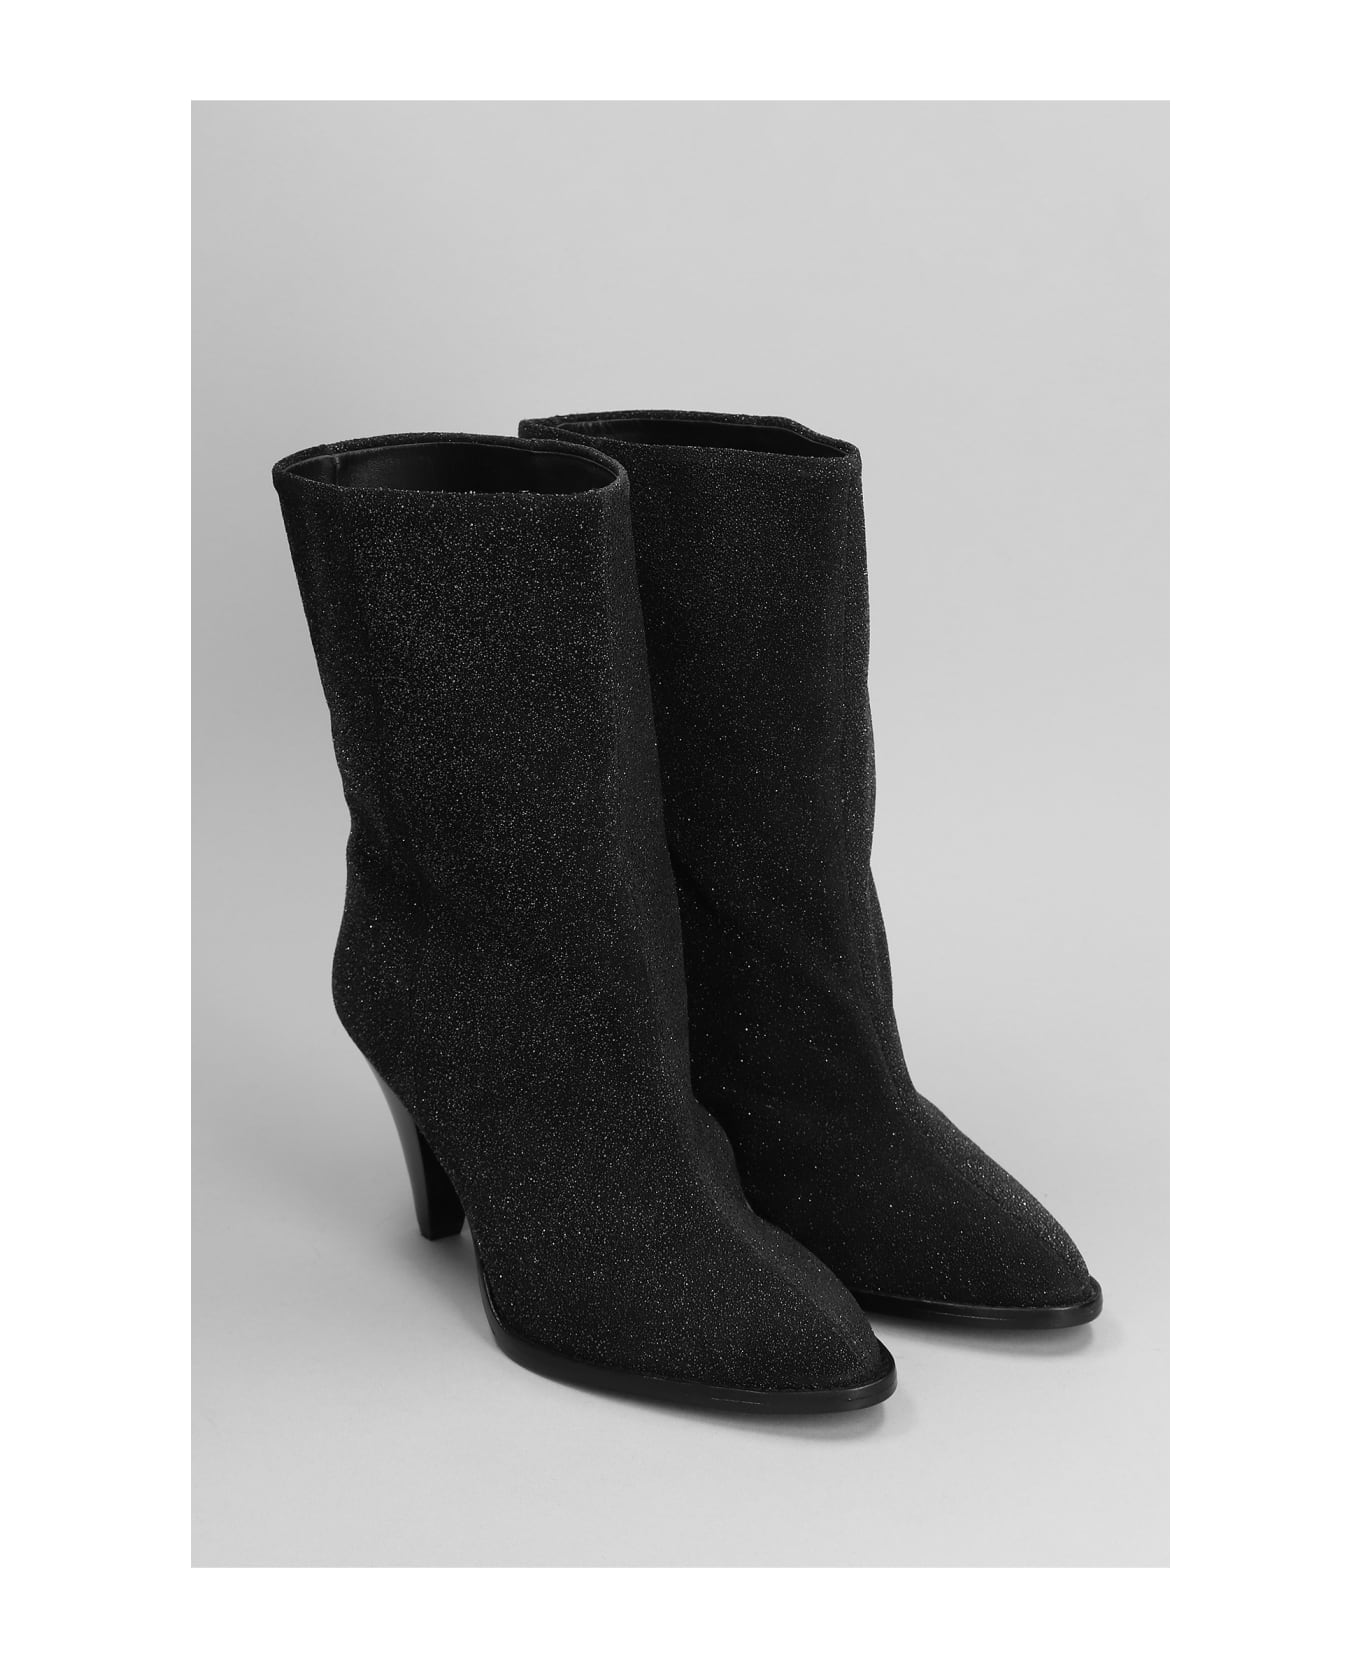 Isabel Marant Rouxa High Heels Ankle Boots In Black Glitter - black